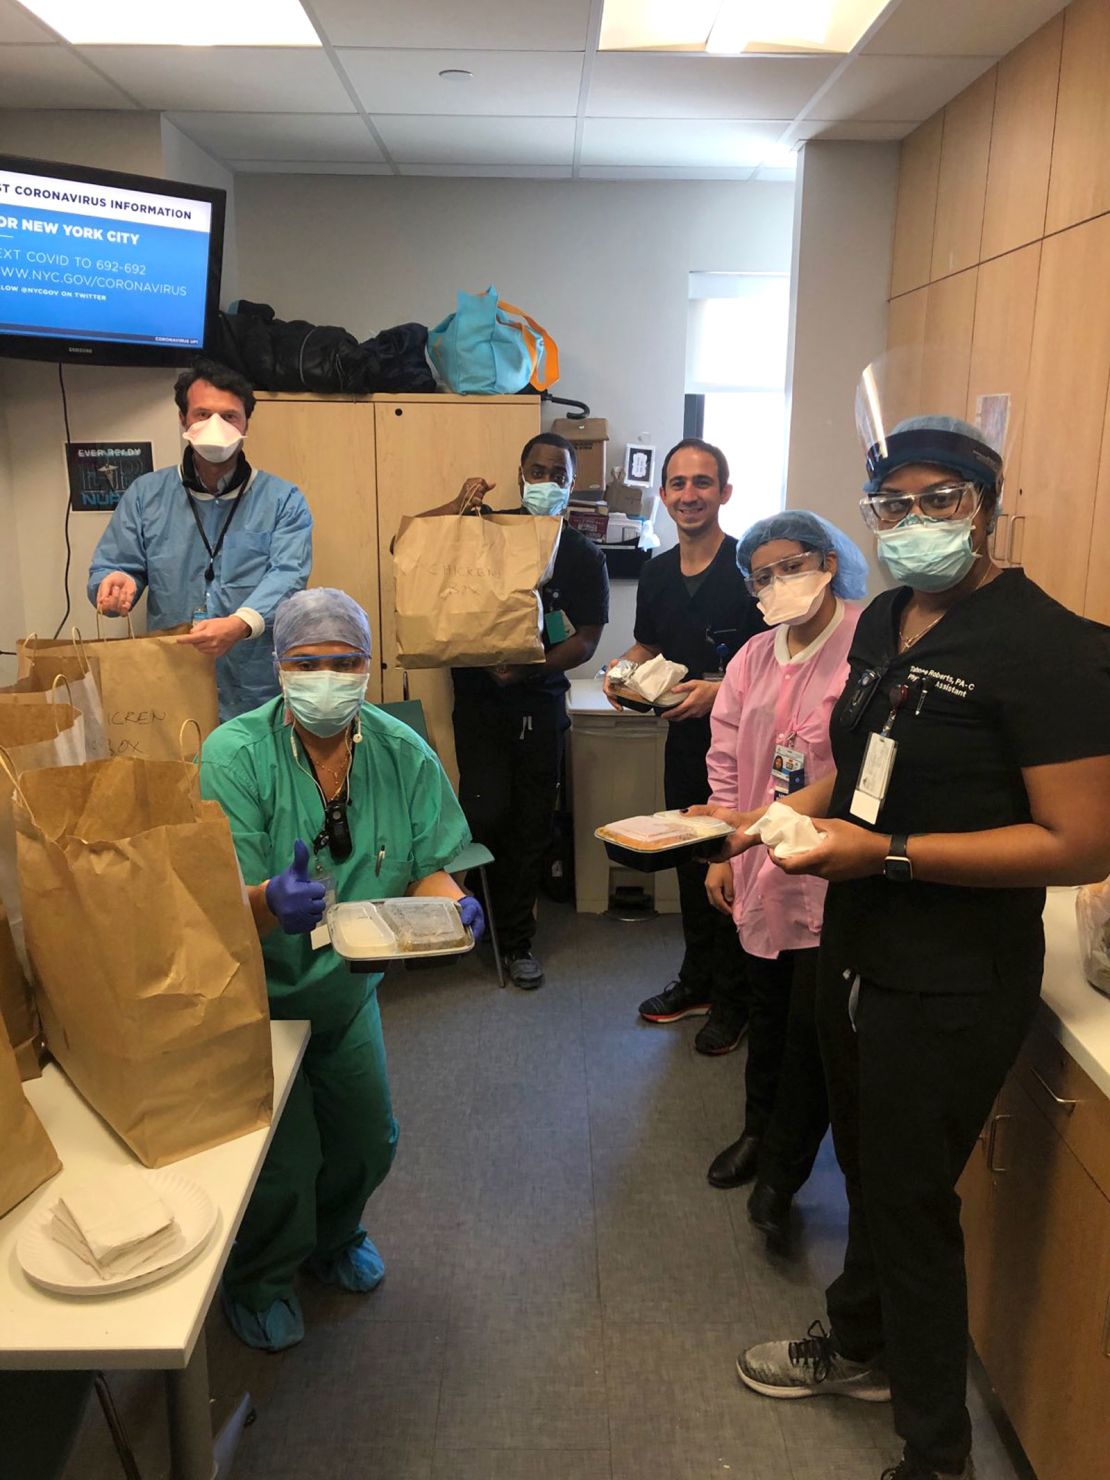 Mt. Sinai Queens' night shift staff enjoy meals donated to them by health care workers at Brigham and Women's Hostpital in Boston.